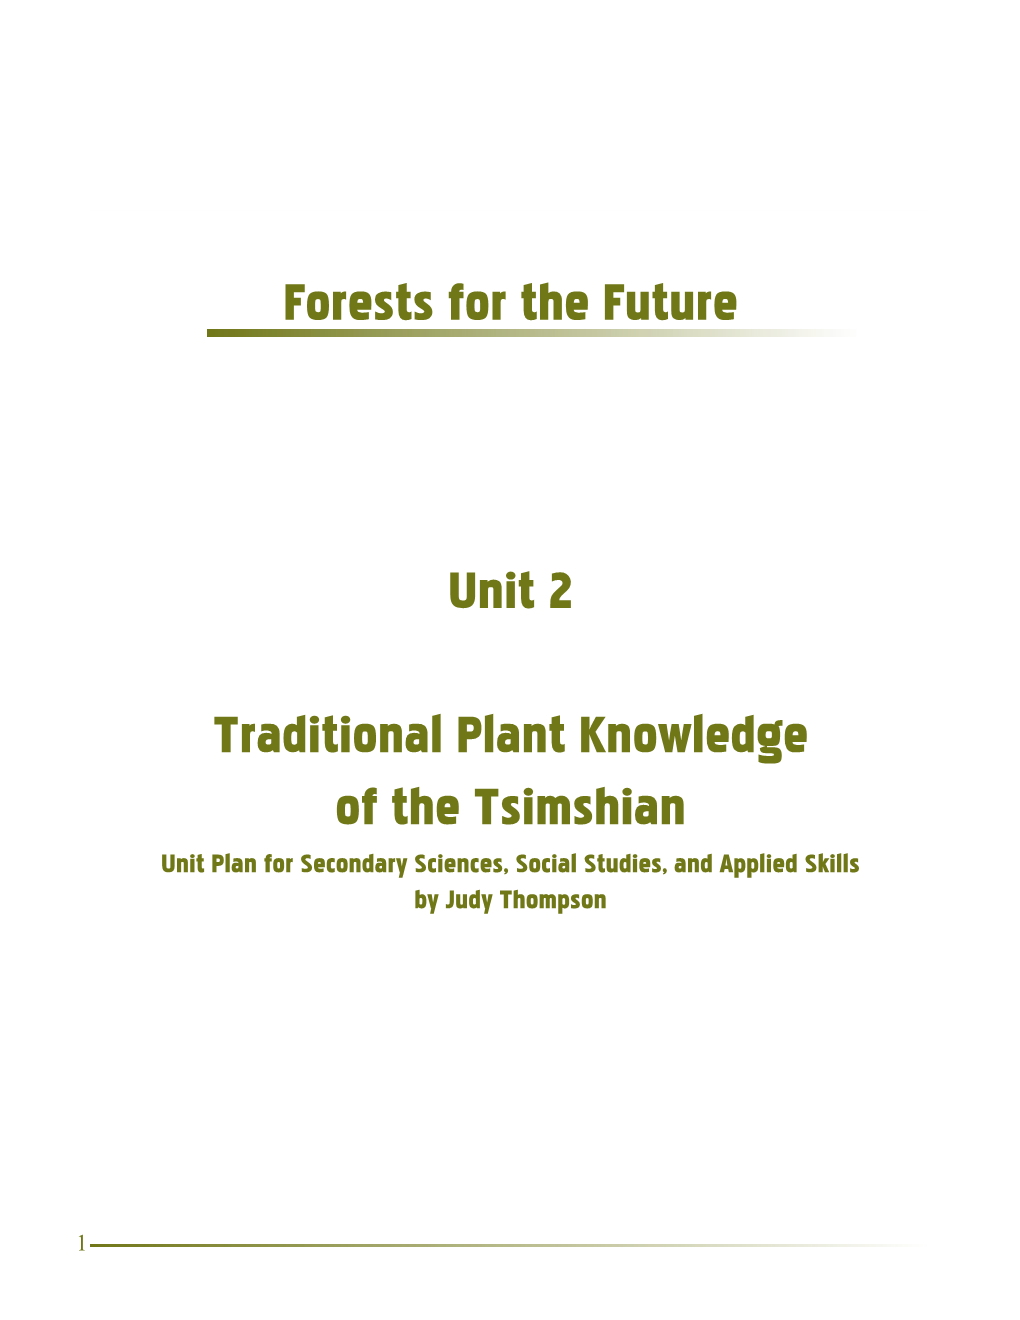 Traditional Plant Knowledge of the Tsimshian Unit Plan for Secondary Sciences, Social Studies, and Applied Skills by Judy Thompson